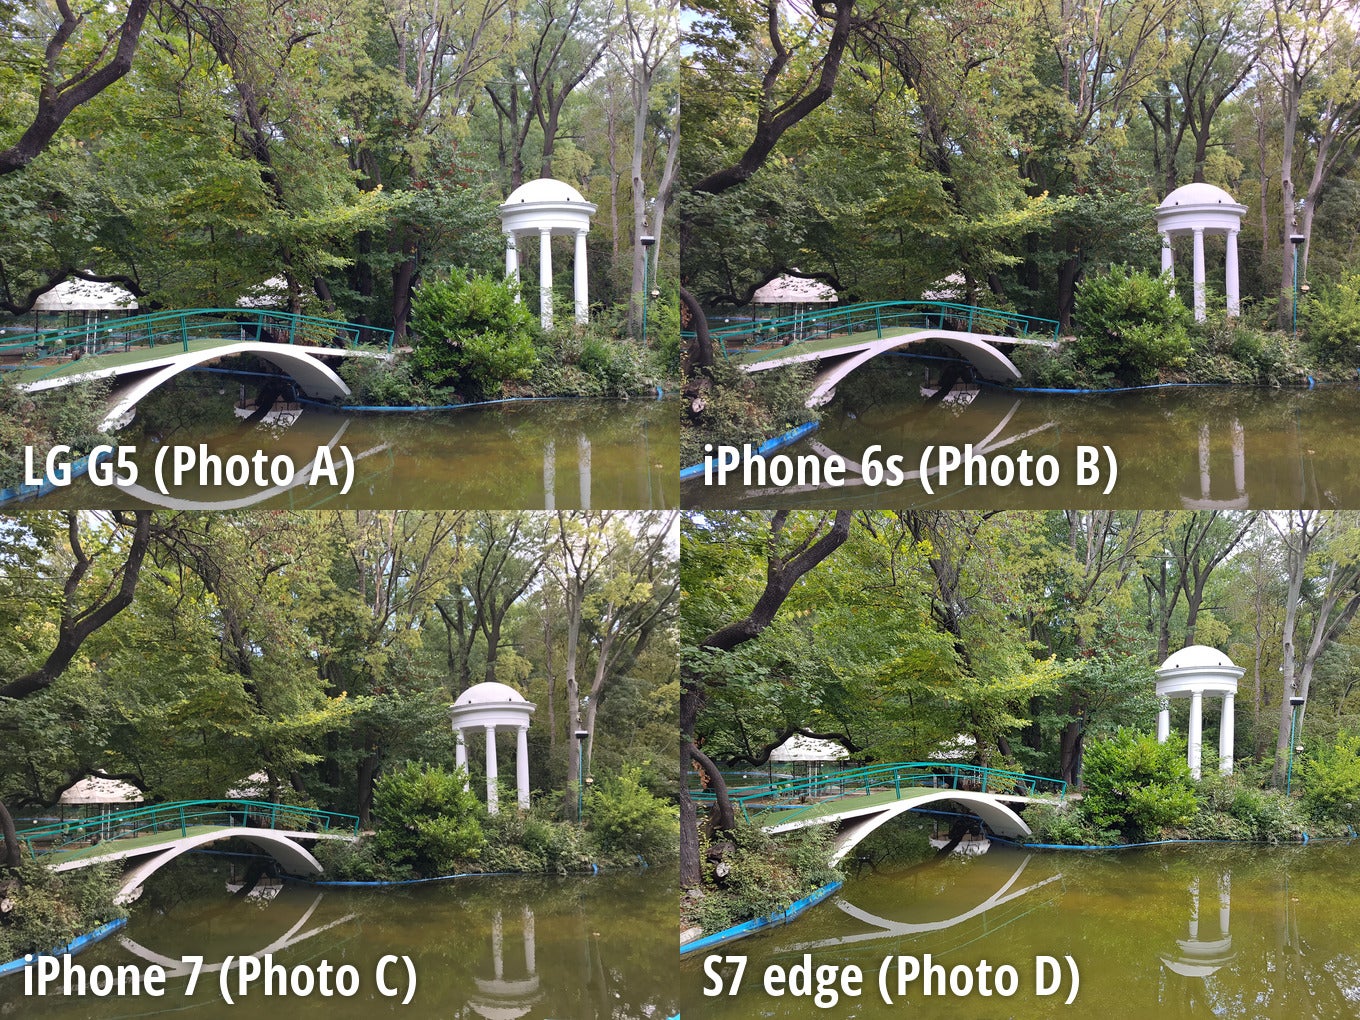 Samsung Galaxy S7 edge wins by a mile in our blind camera comparison, iPhone 7 is distant second